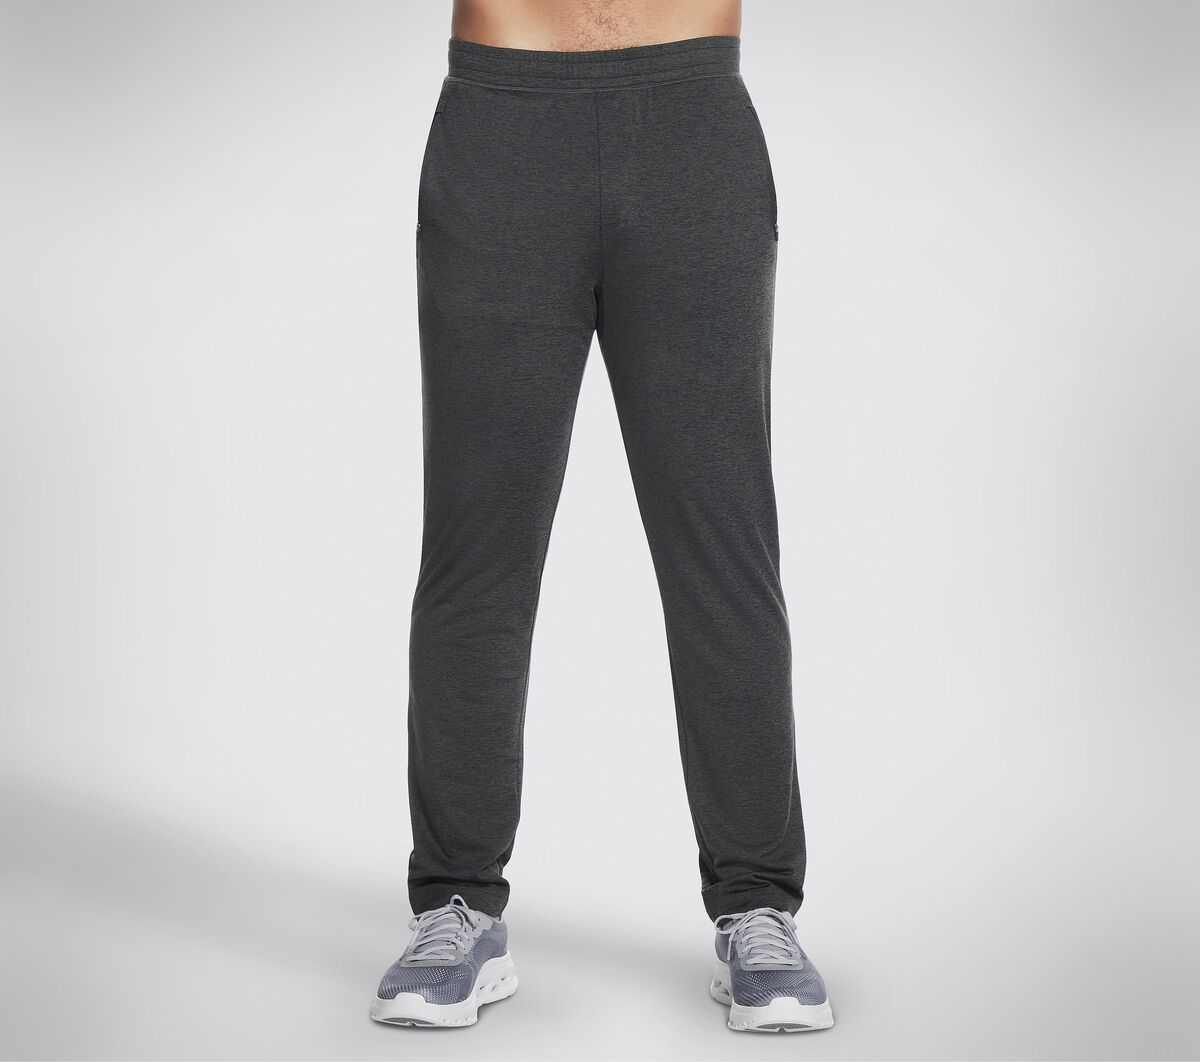 GO KNIT ULTRA Tapered Pant